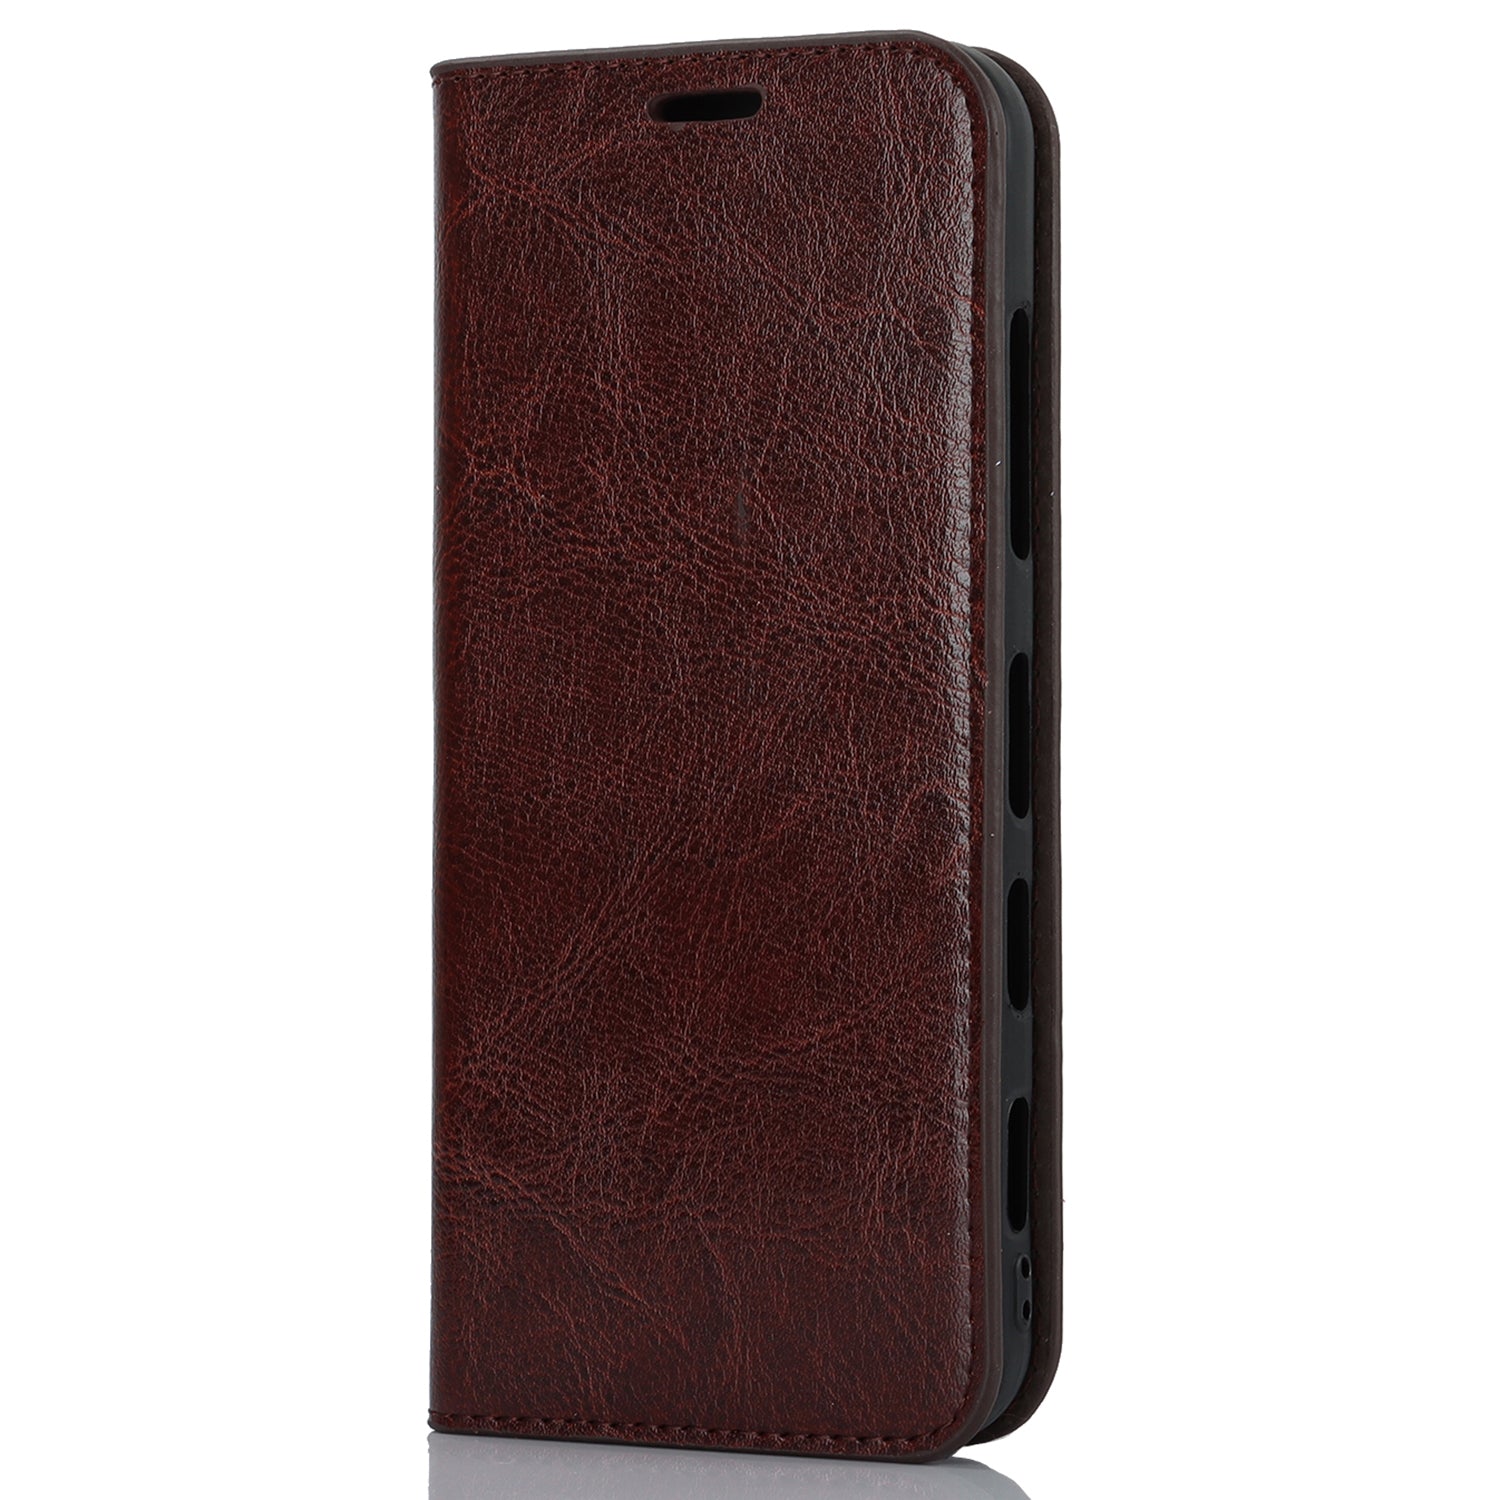 Uniqkart for Kyocera Android One S10 / One S9 Fall Proof Phone Case Crazy Horse Texture Genuine Cow Leather Stand Wallet Cover - Dark Brown